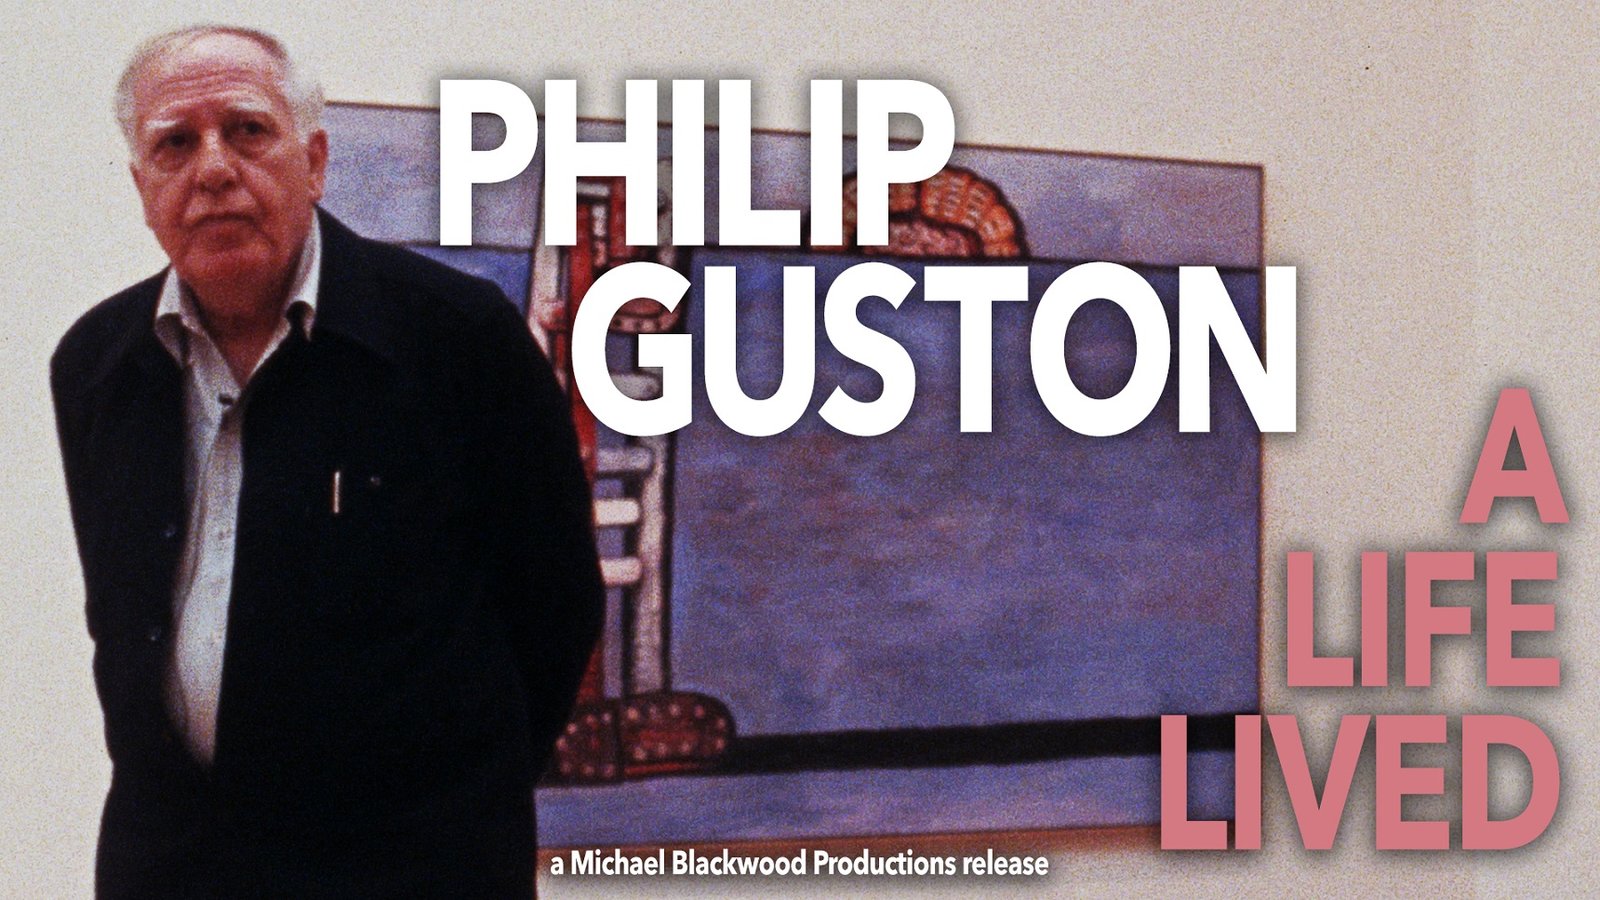 Philip Guston: A Life Lived